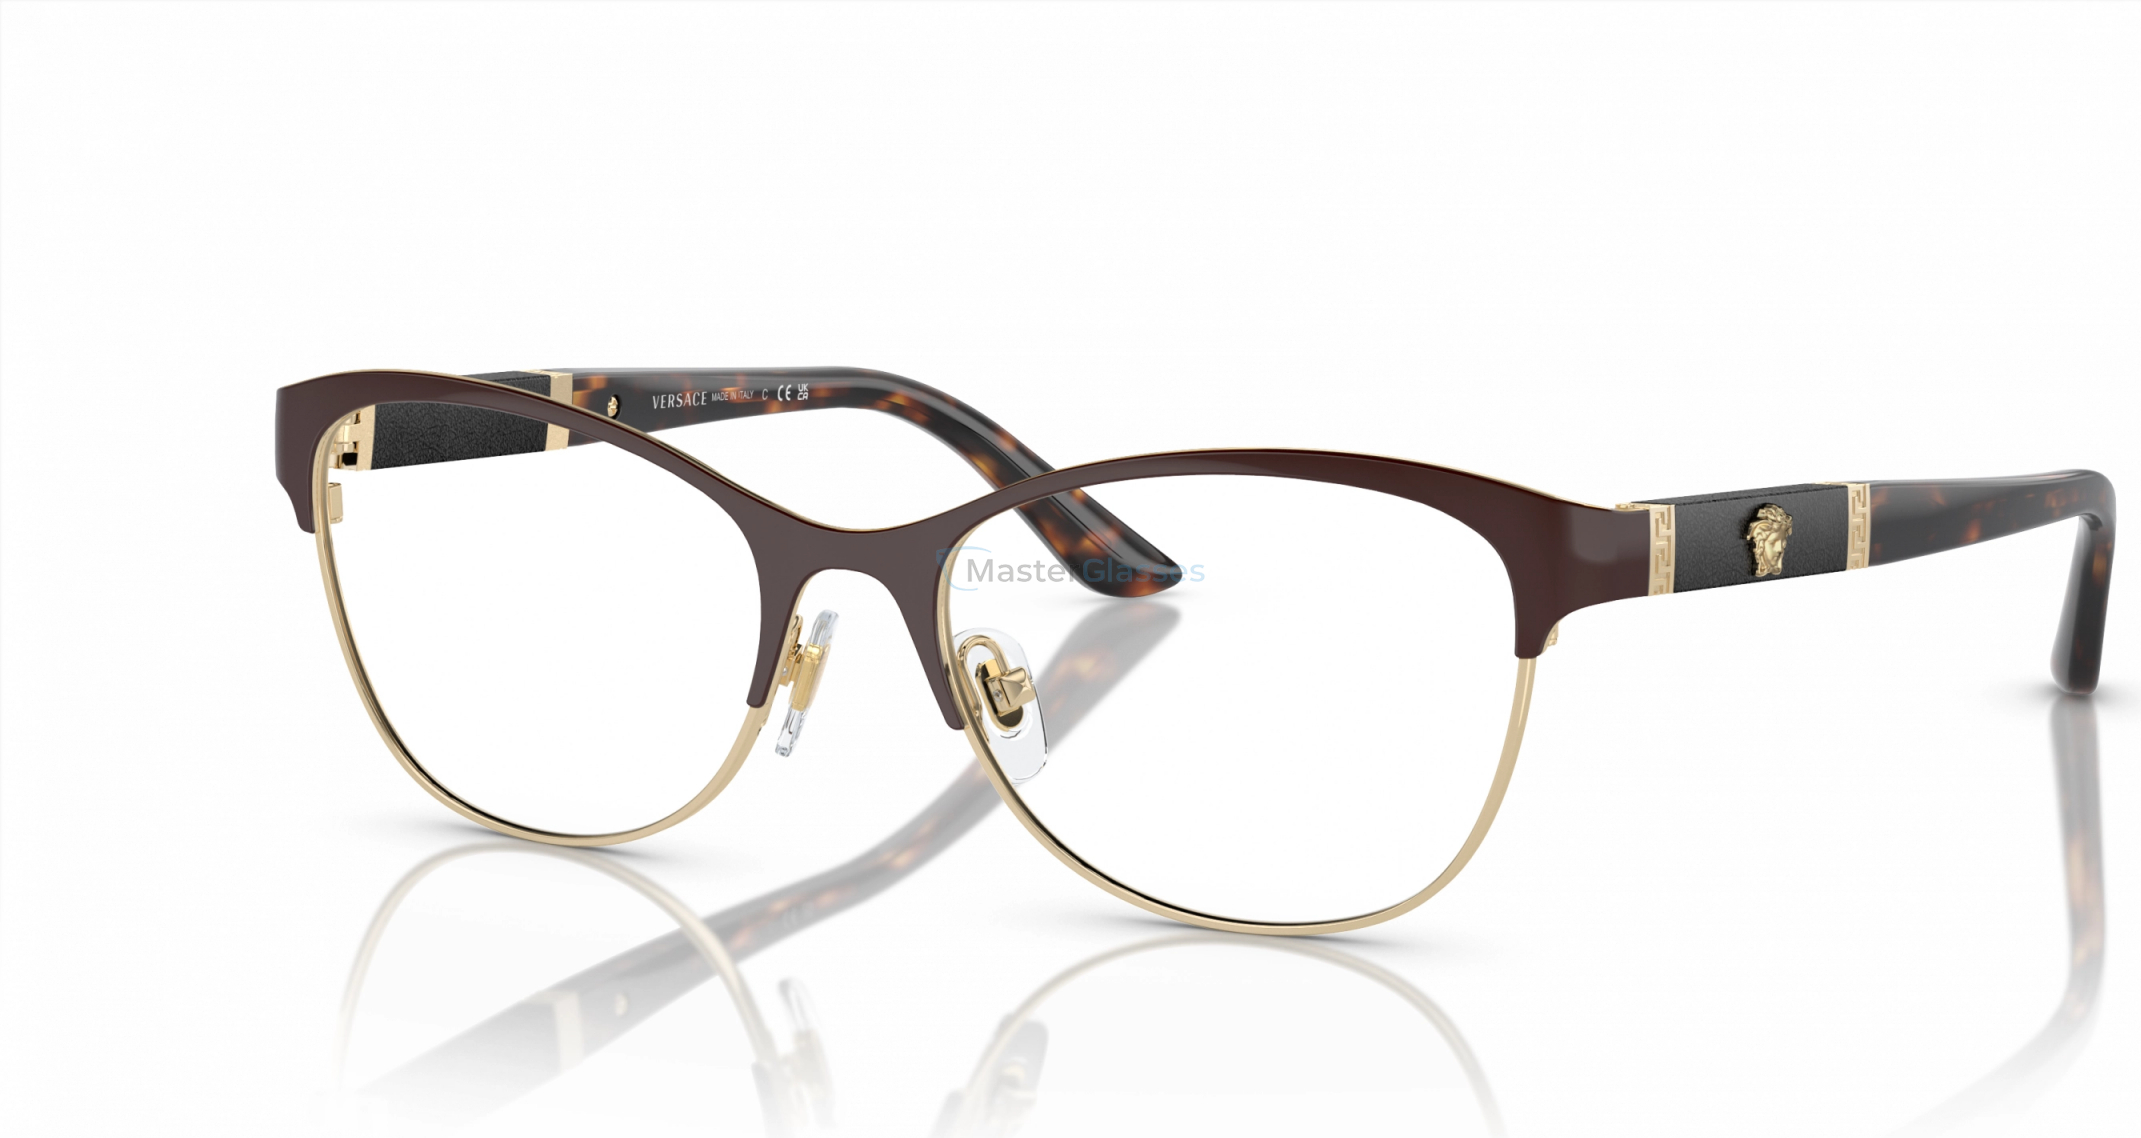  Versace VE1233Q 1344 Brown/pale Gold